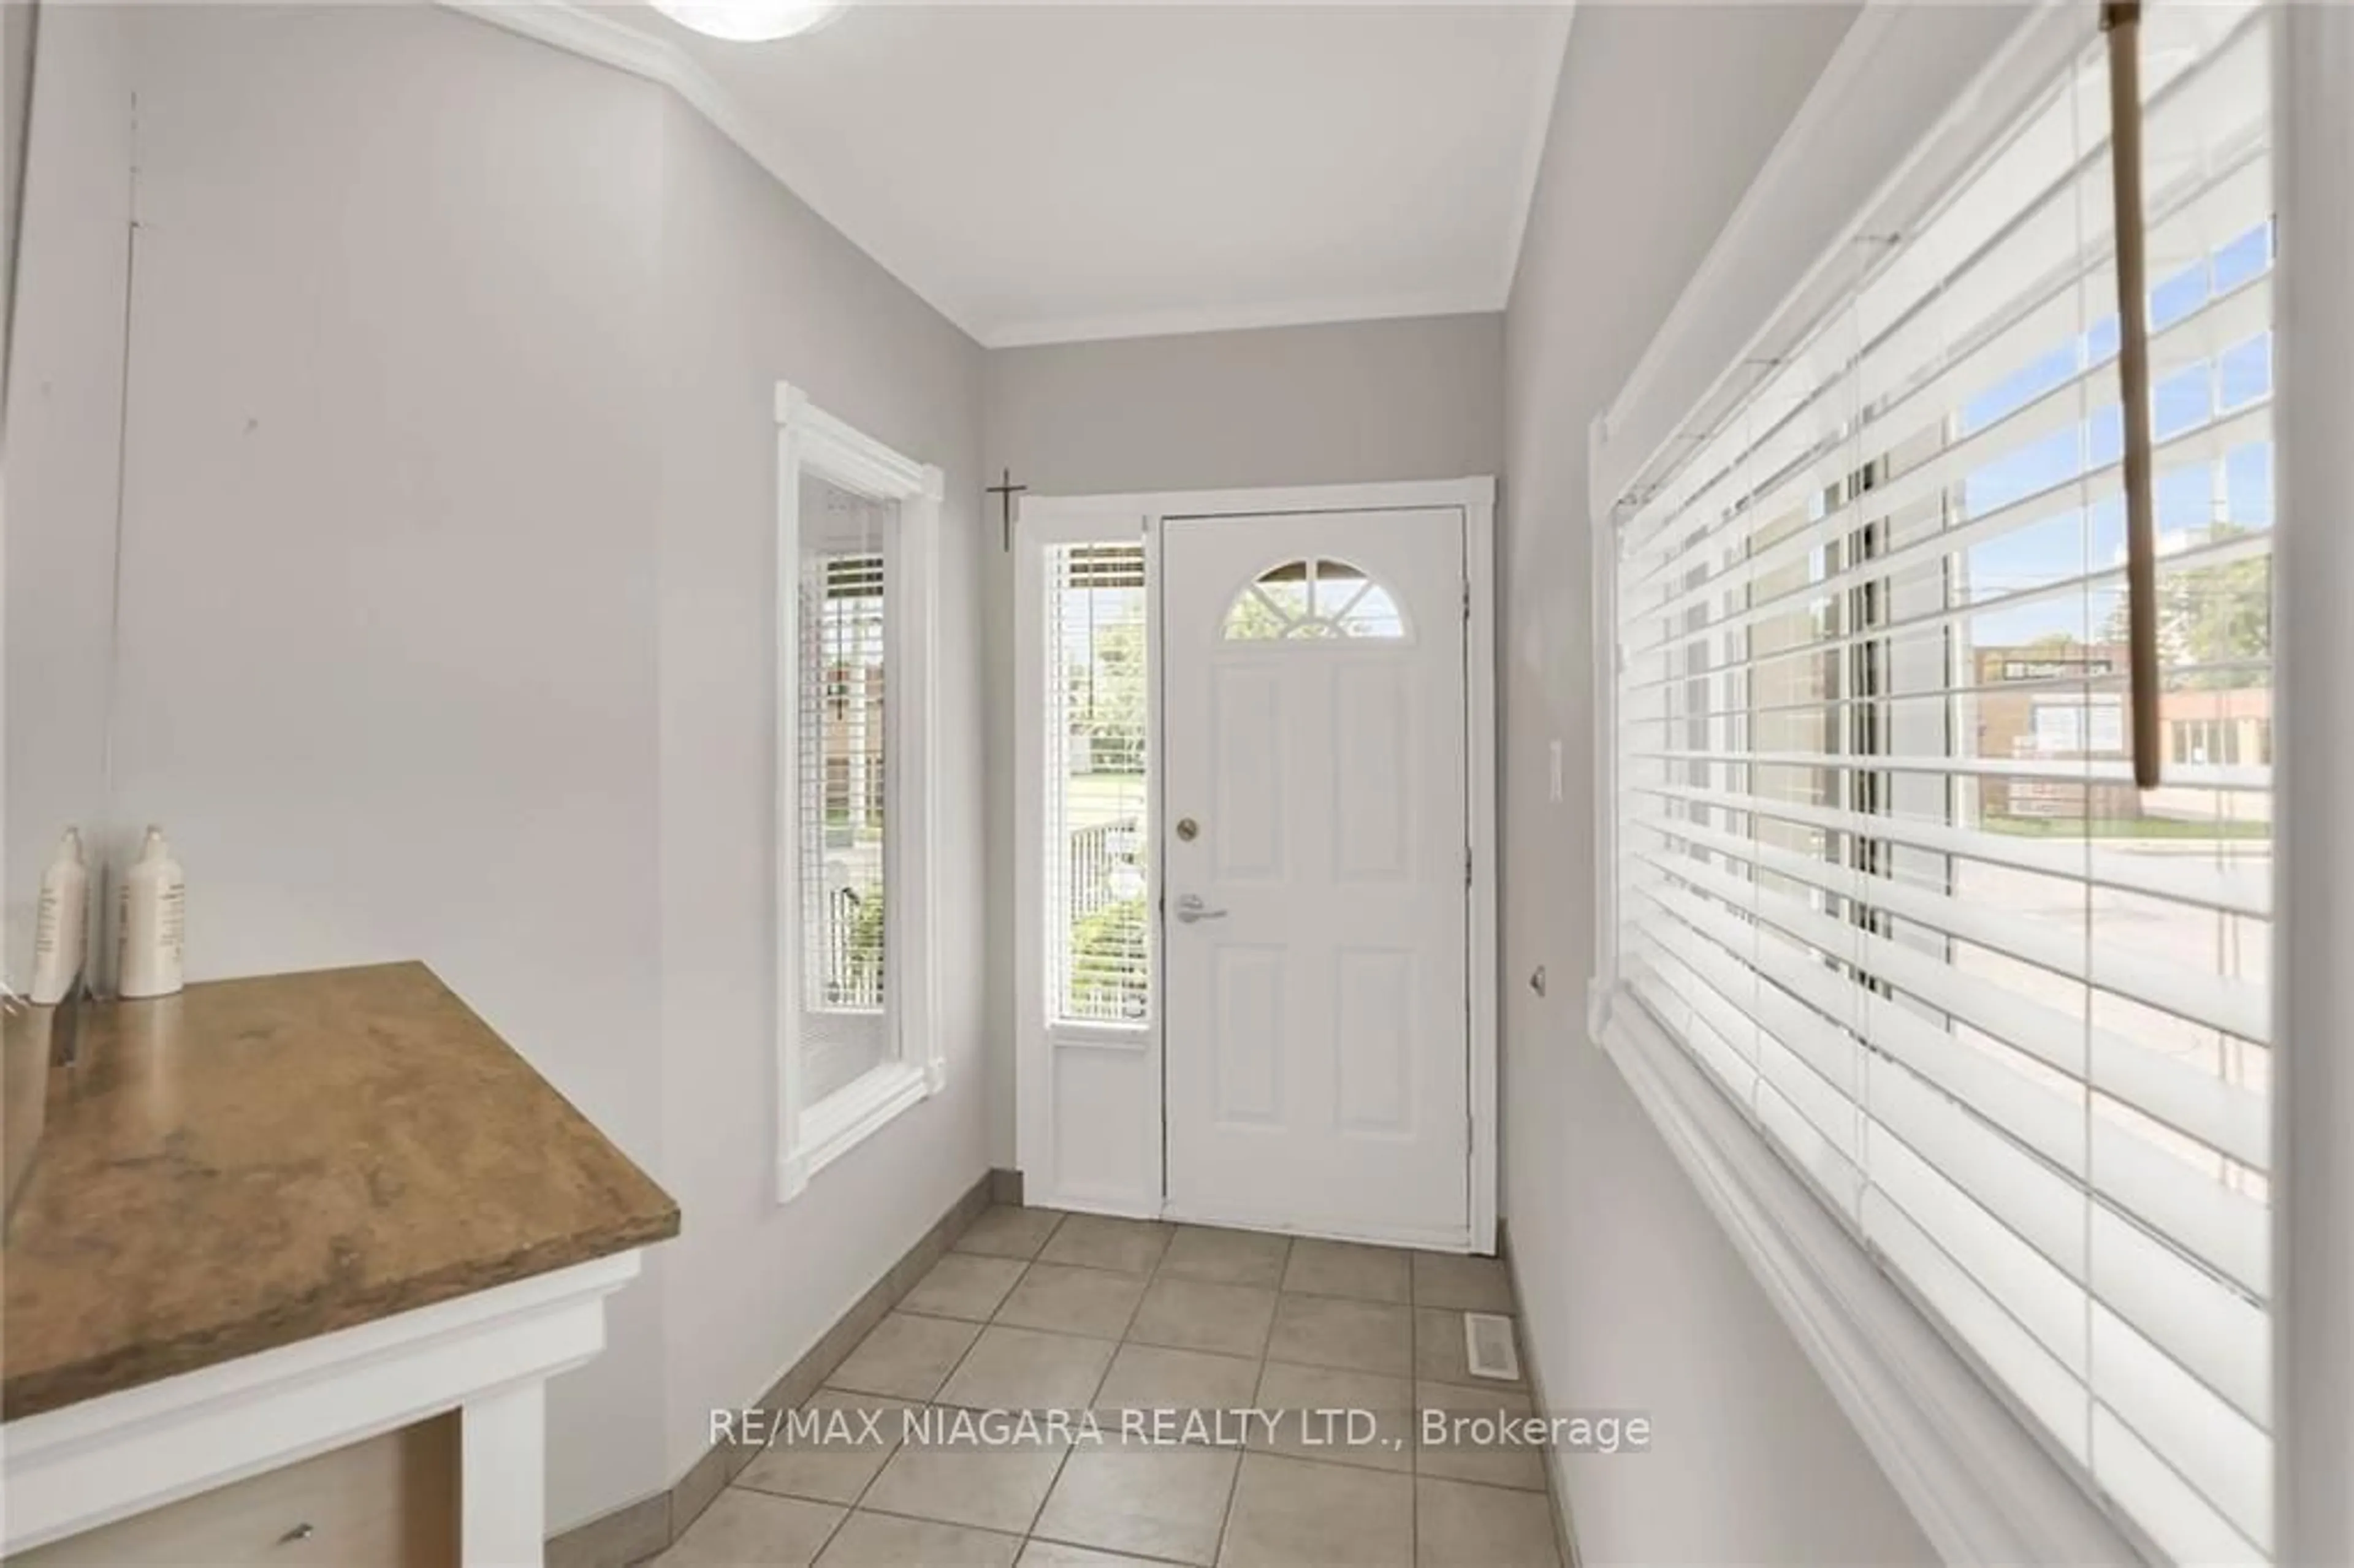 Indoor entryway for 145 Welland Ave, St. Catharines Ontario L2R 2N7